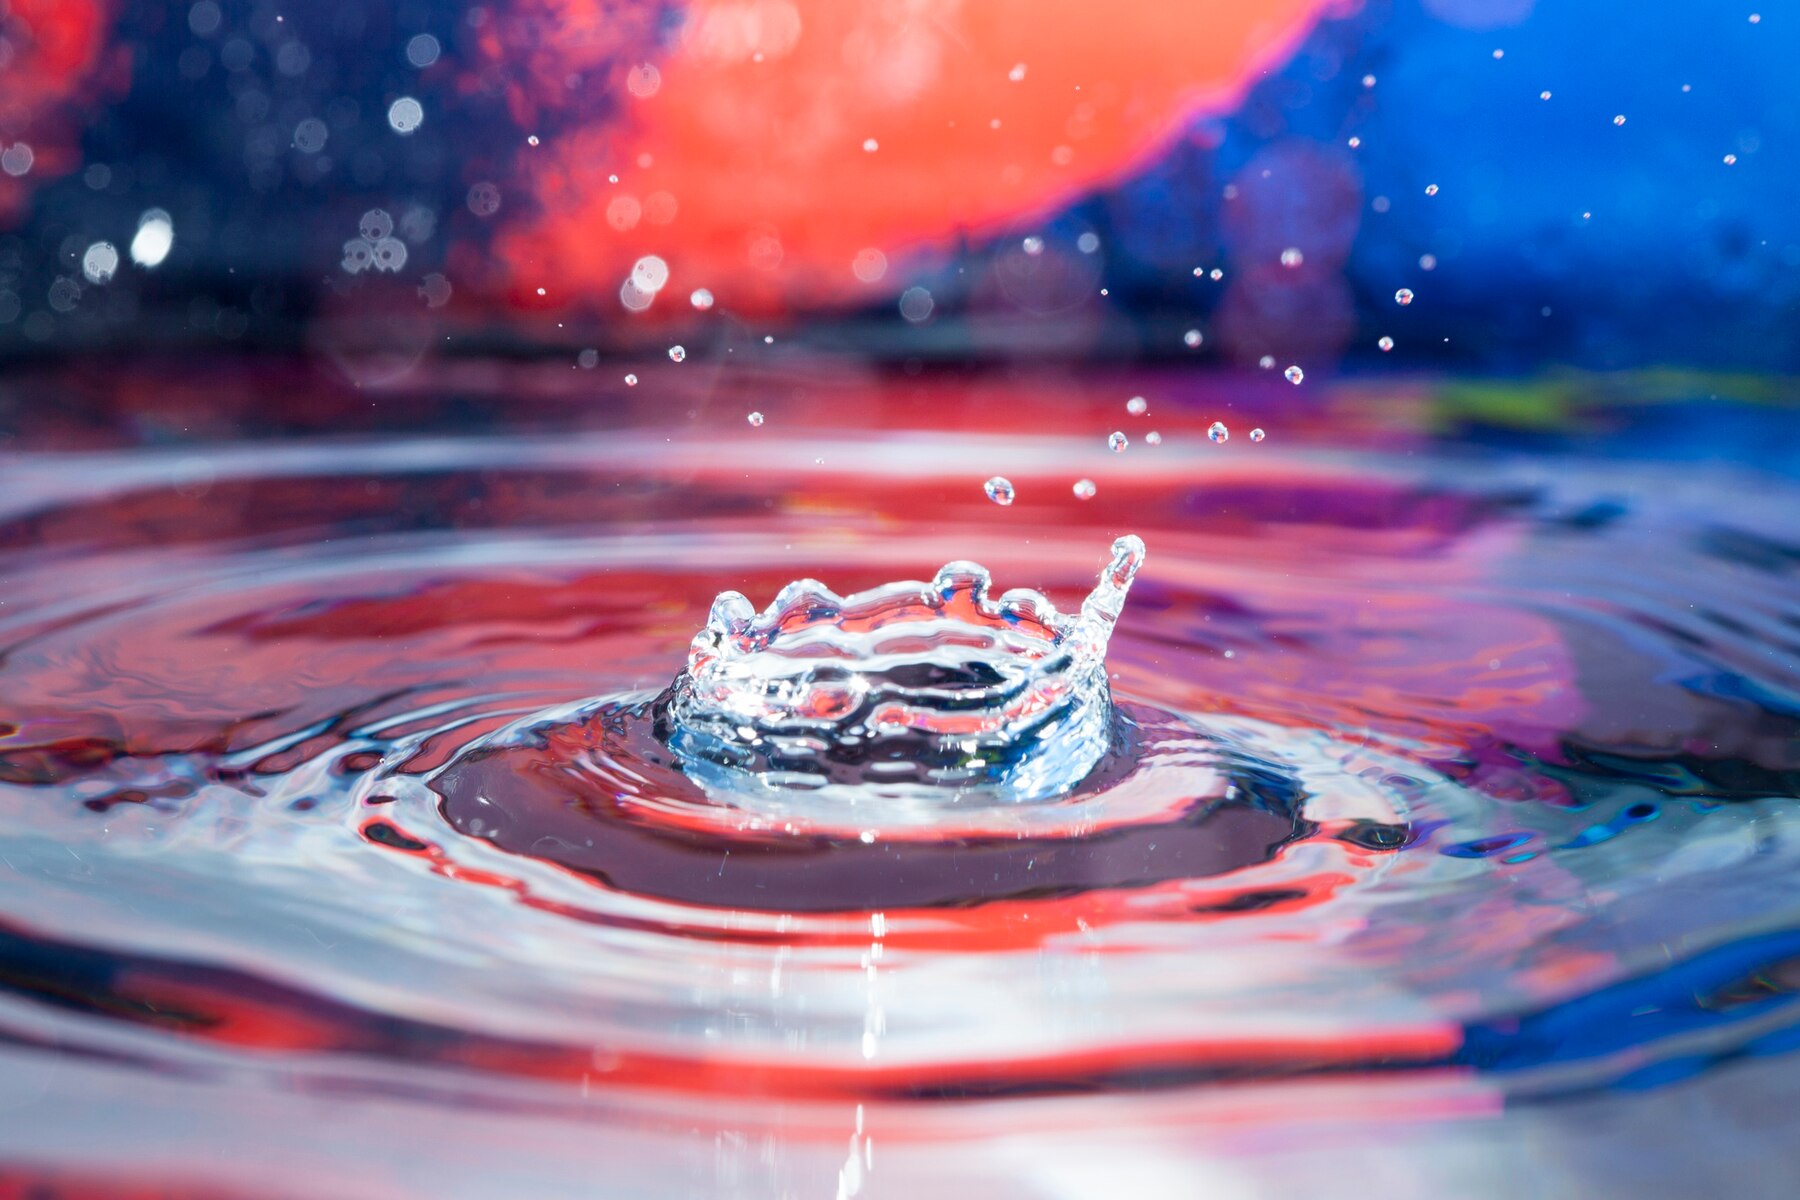 water-surface-with-splashes-and-colorful-background_23-2147608486.jpg